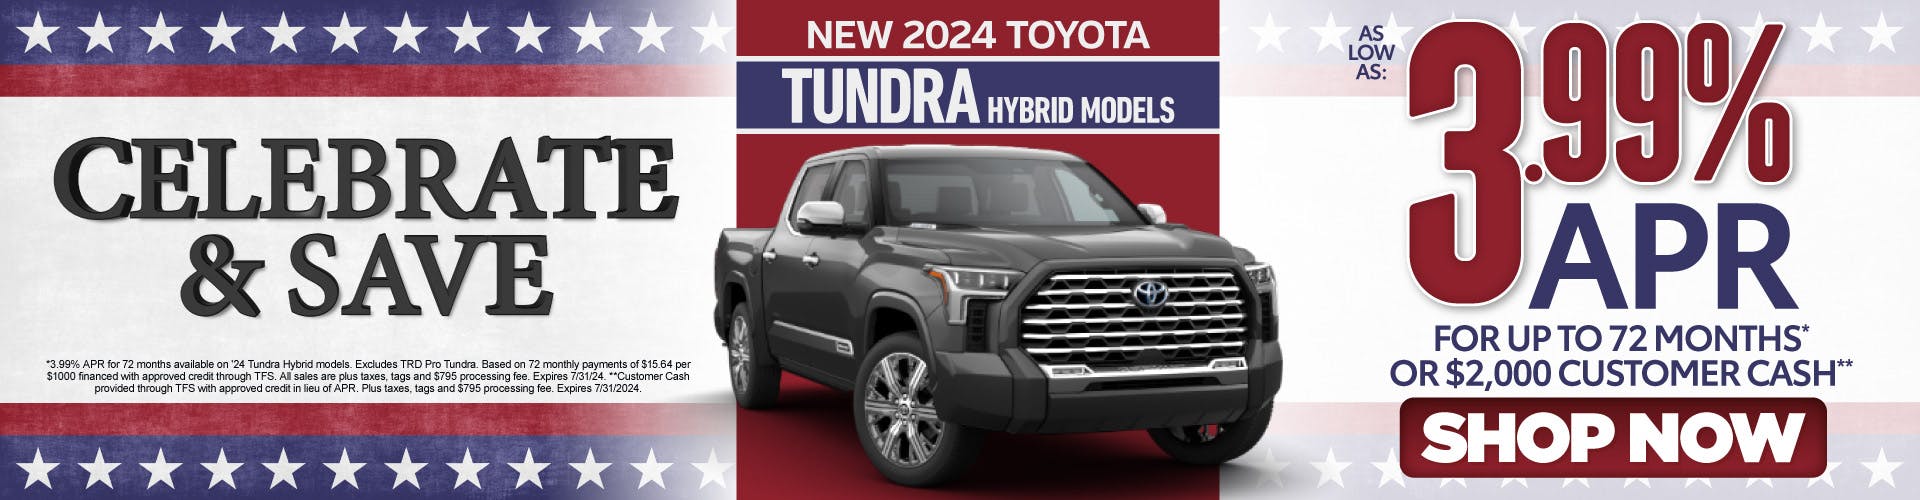 New 2024 Toyota Tundra Hybrid – As Low as 3.99% APR for up to 72 months* – Act Now